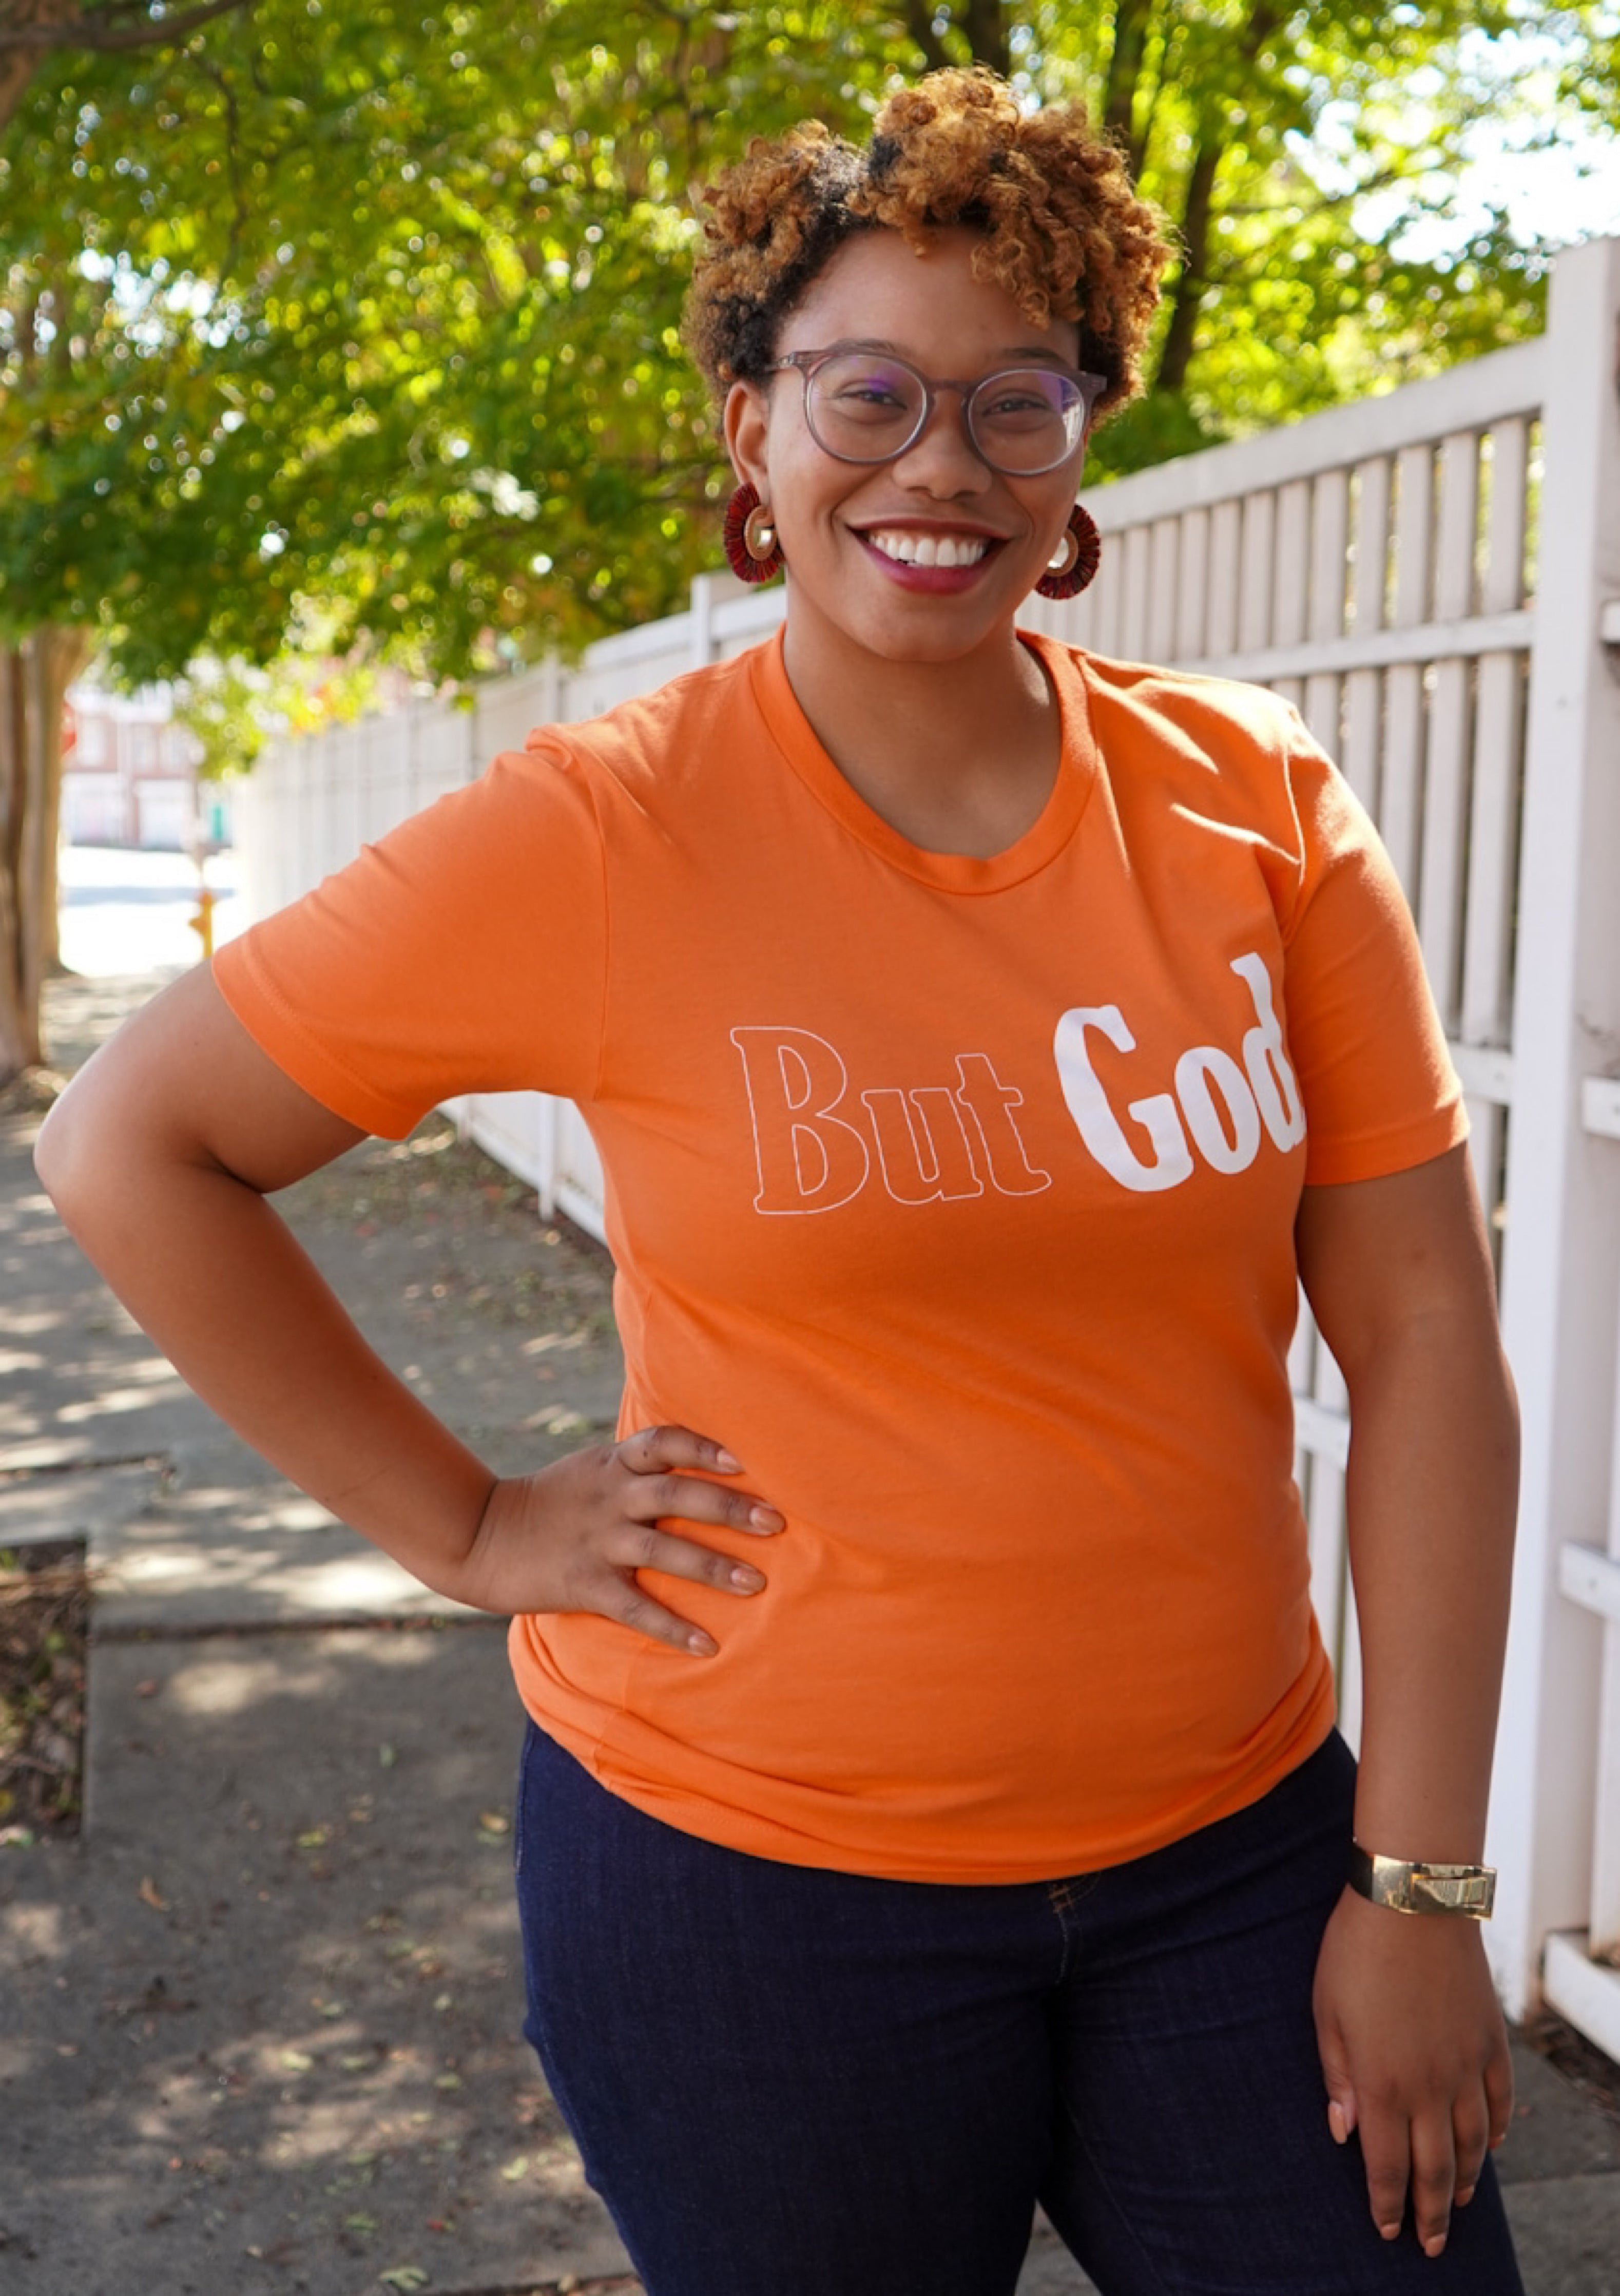 But God T-Shirt - Short Sleeve Orange & White - Jewellery Unique Gifts & Accessories